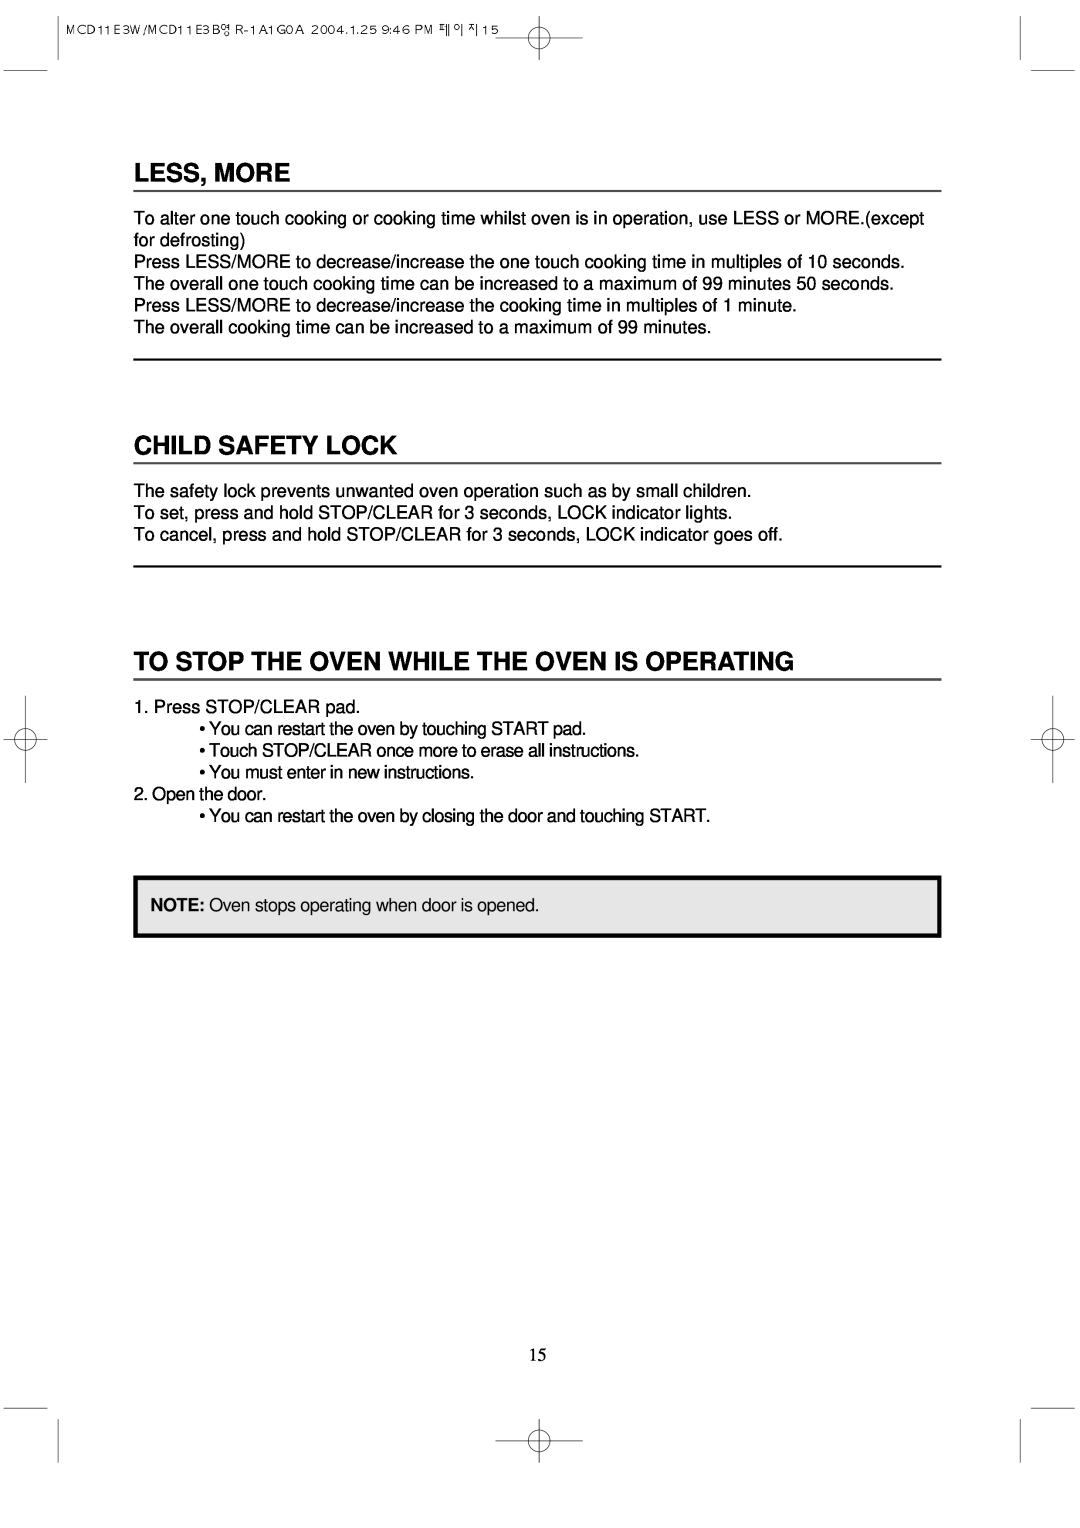 Magic Chef MCD11E3B instruction manual Less, More, Child Safety Lock, To Stop The Oven While The Oven Is Operating 